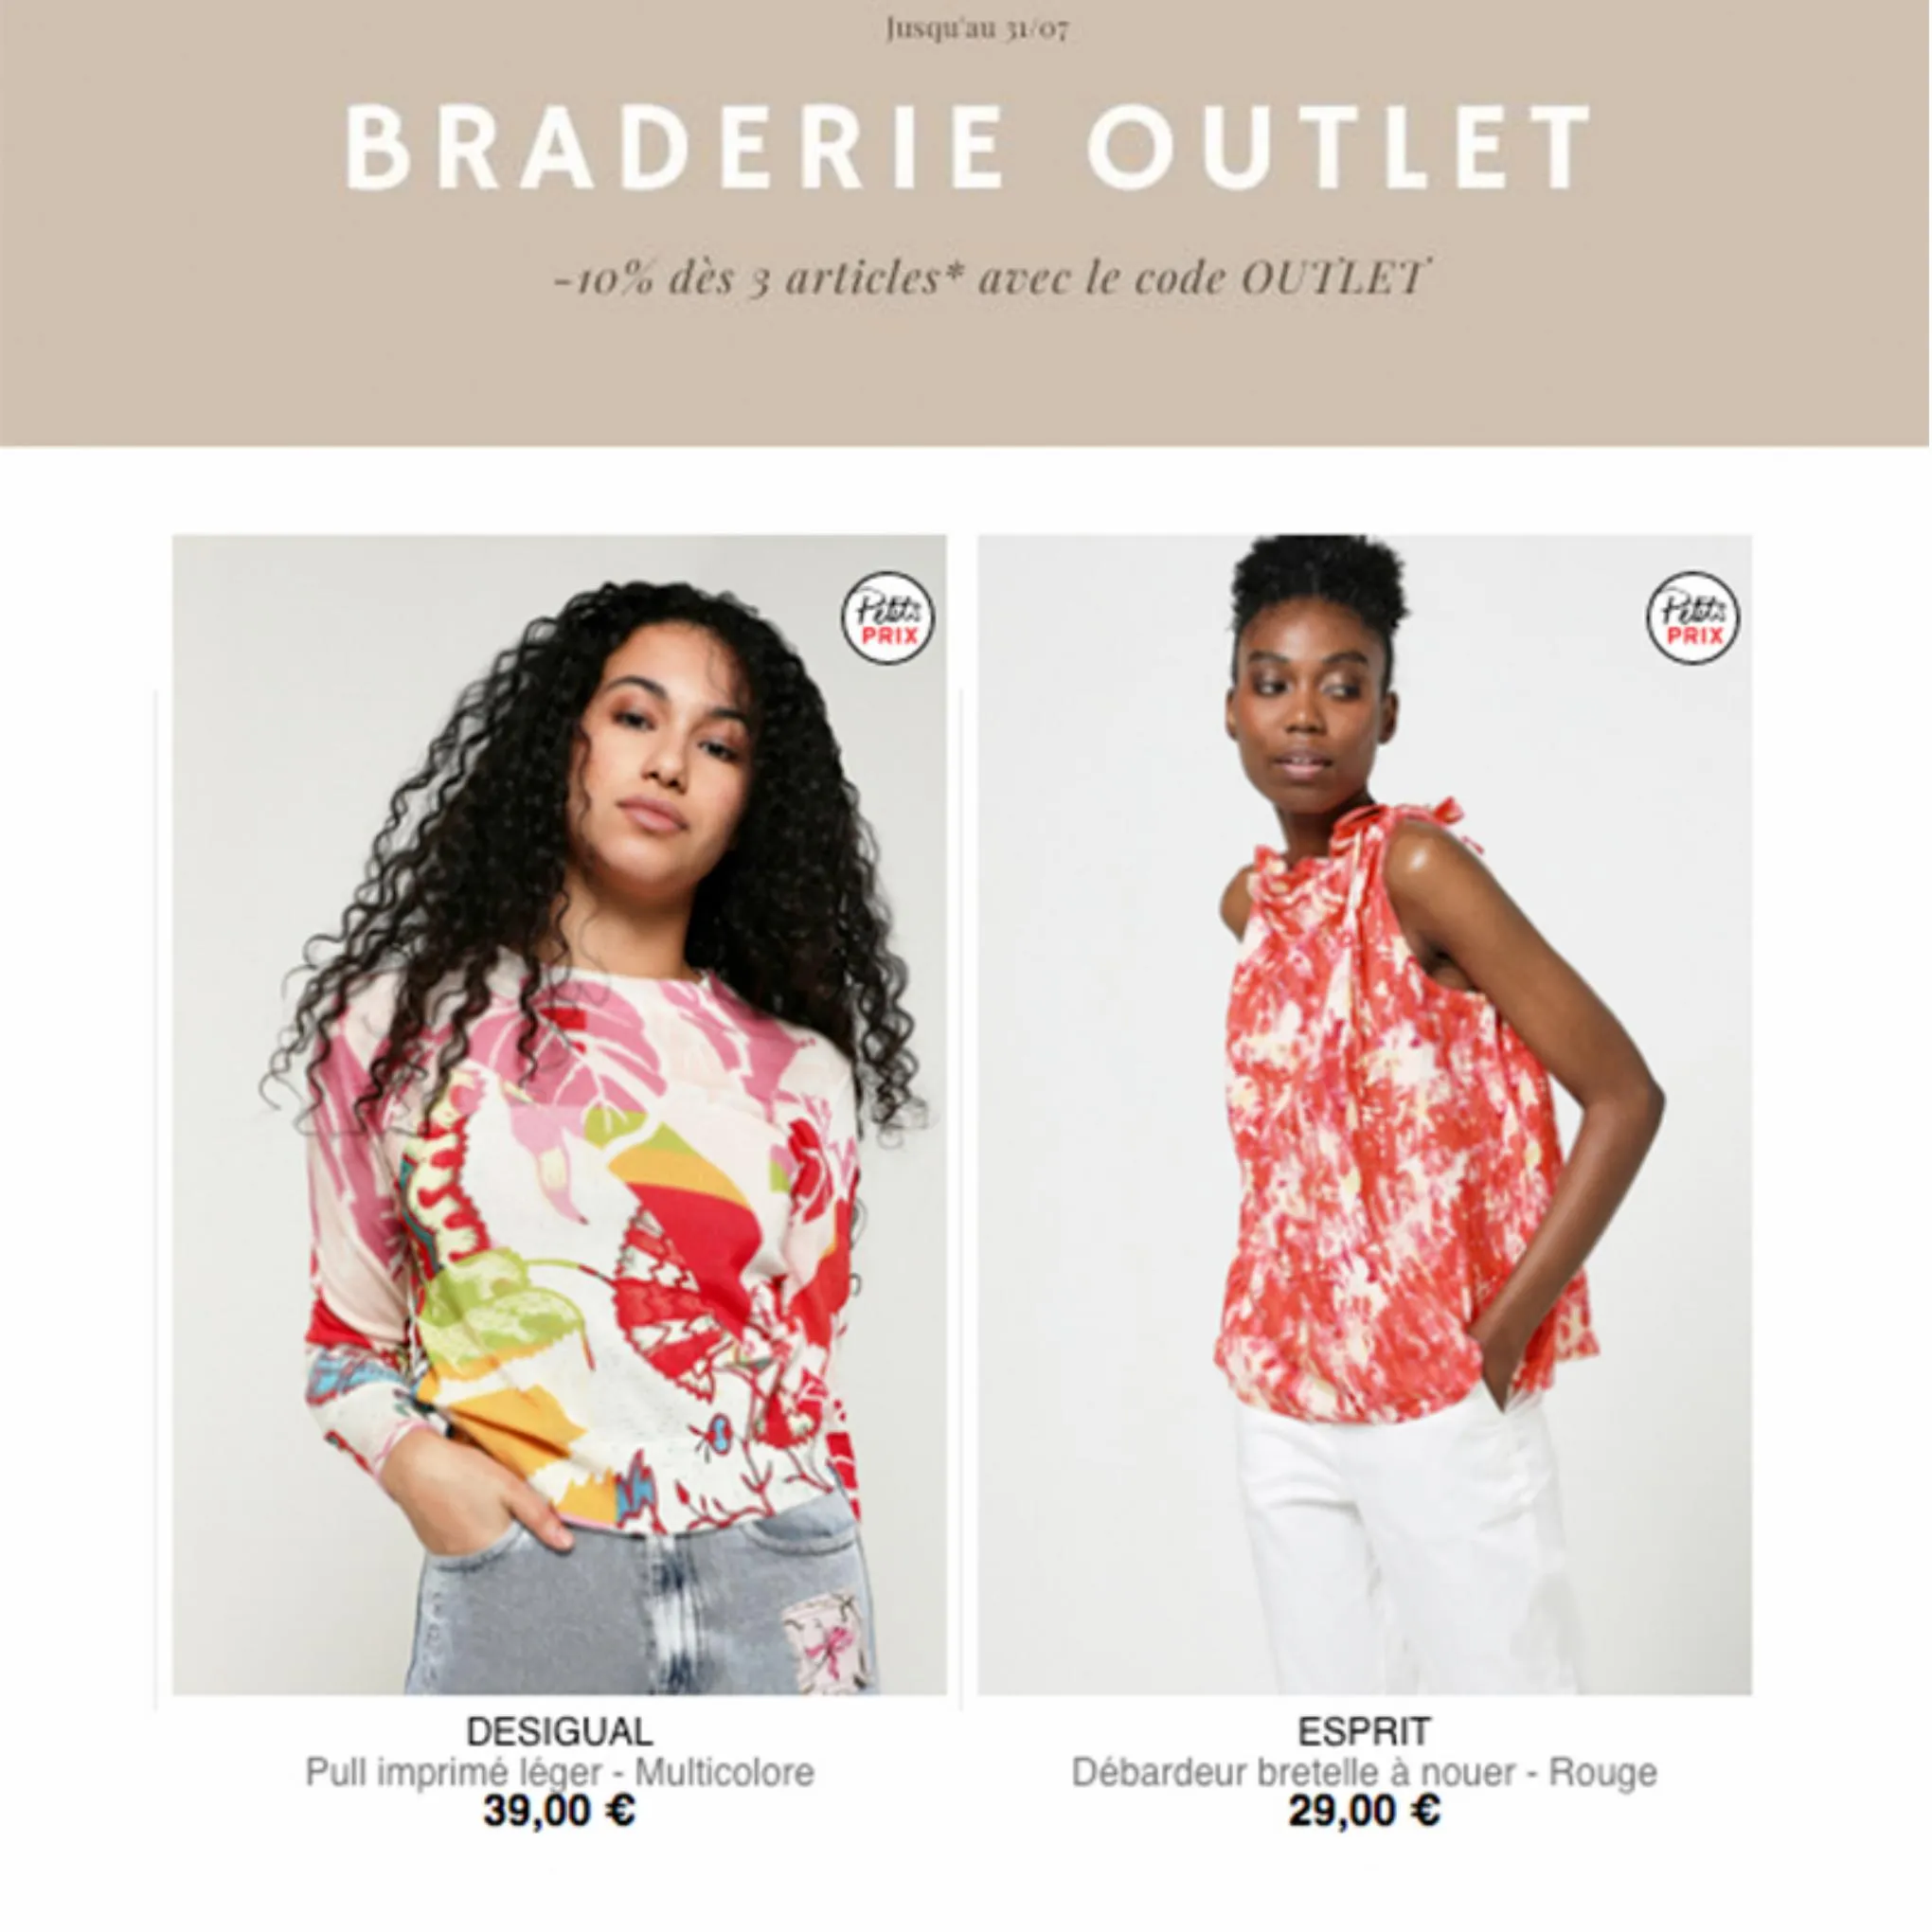 Catalogue Braderie Outlet, page 00009